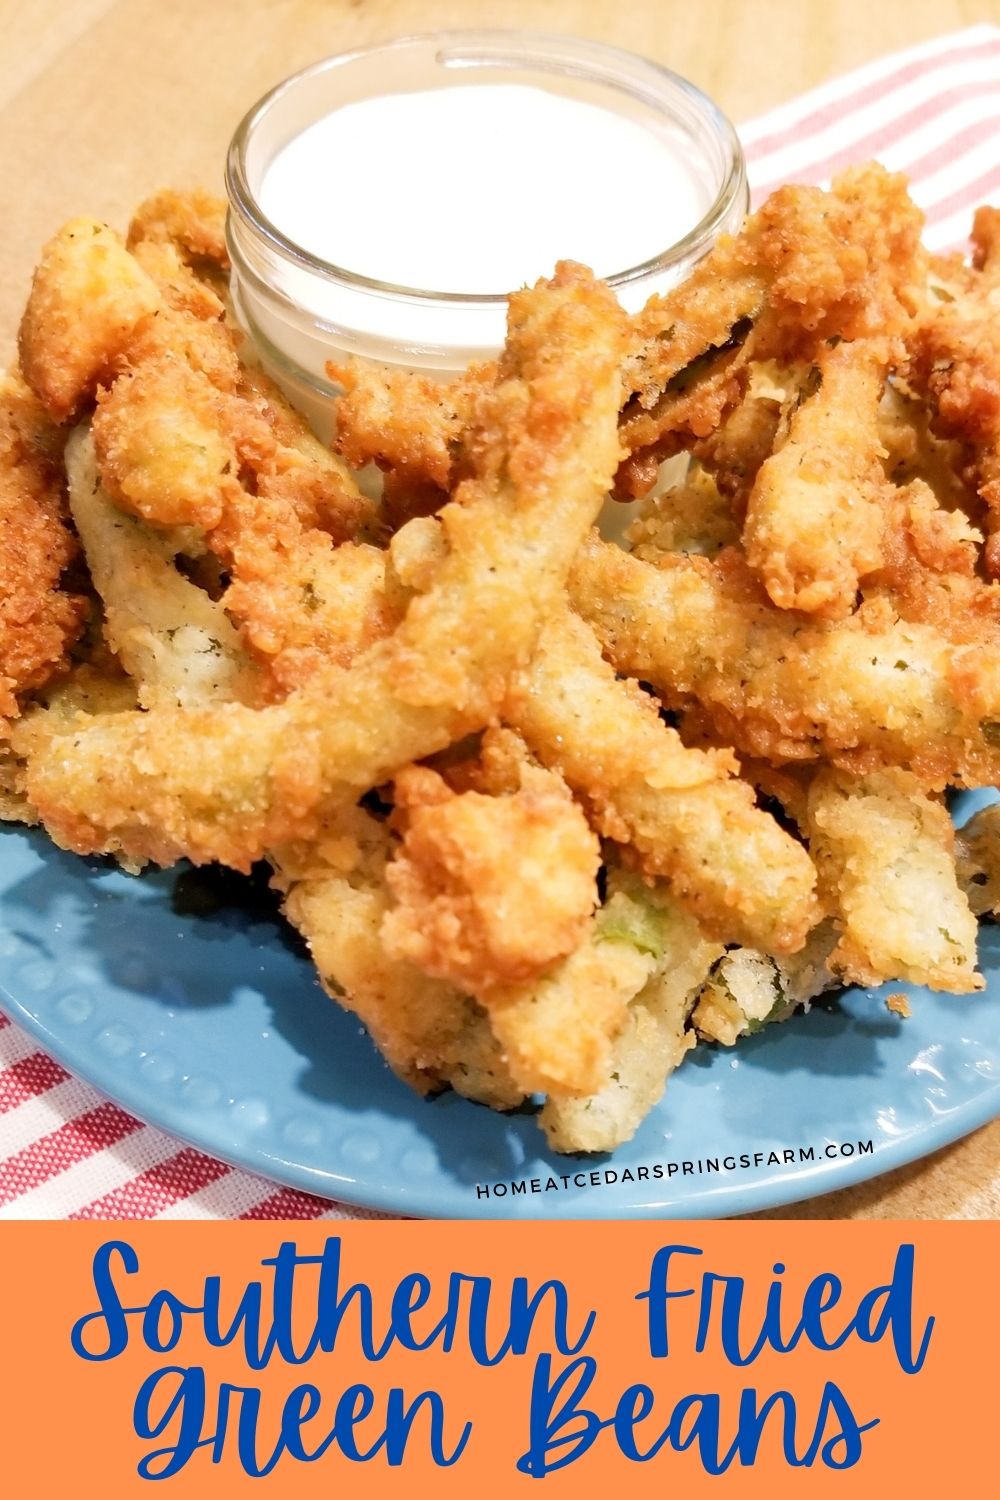 Southern Fried Green Beans